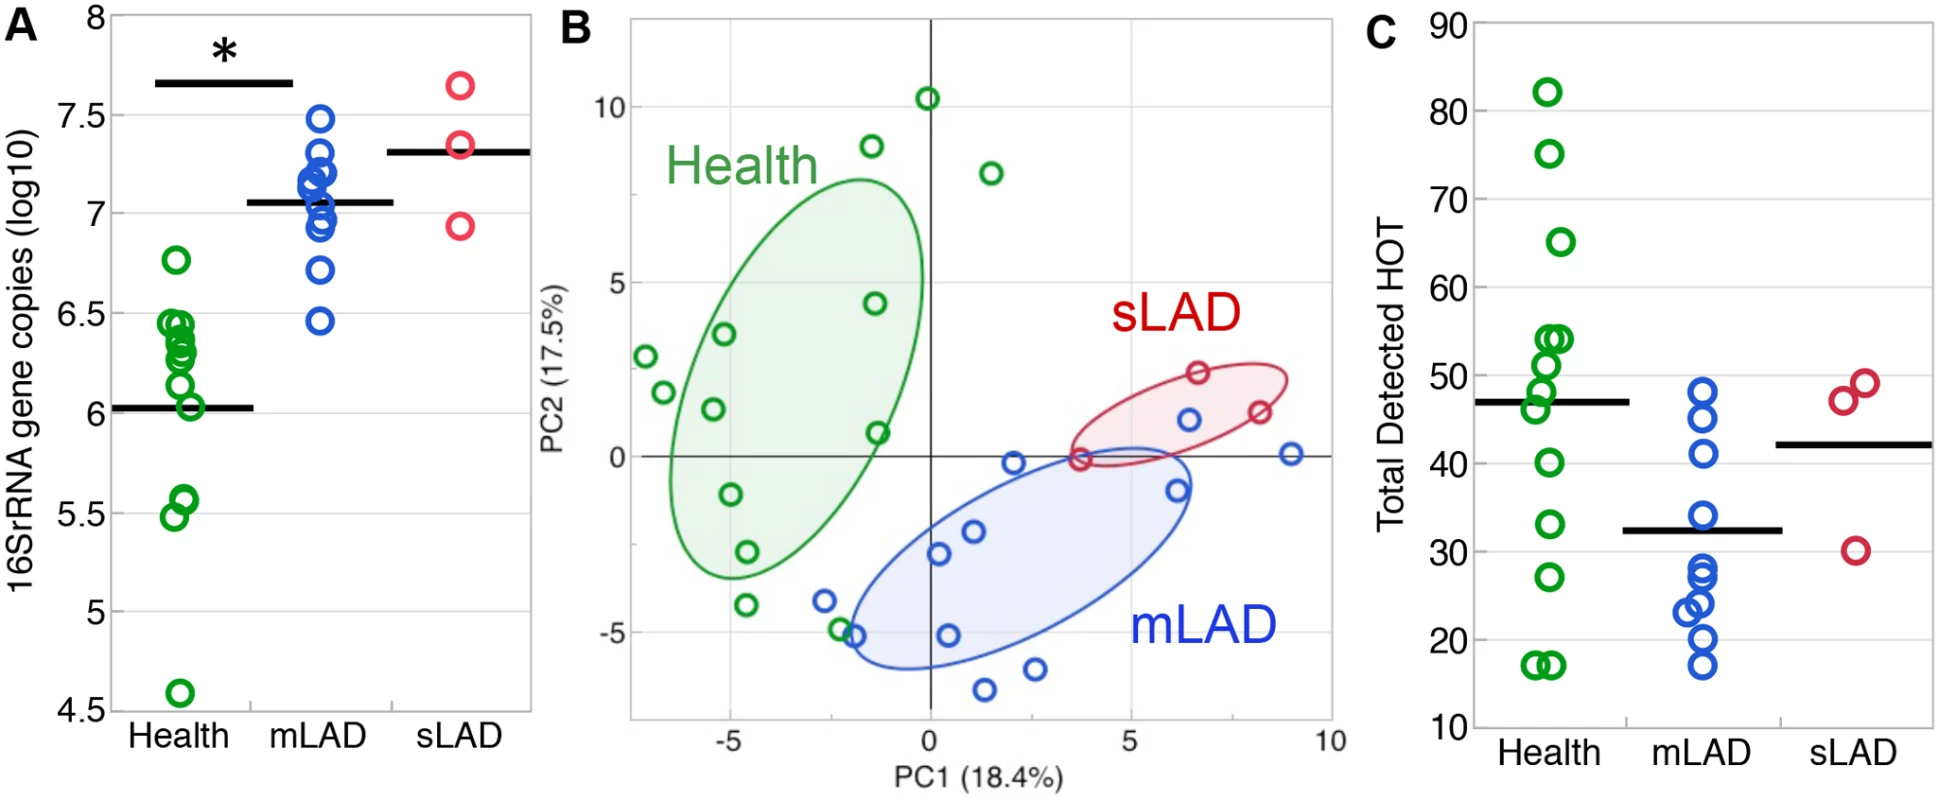 Microbial load and diversity of LAD-1 subgingival communities.